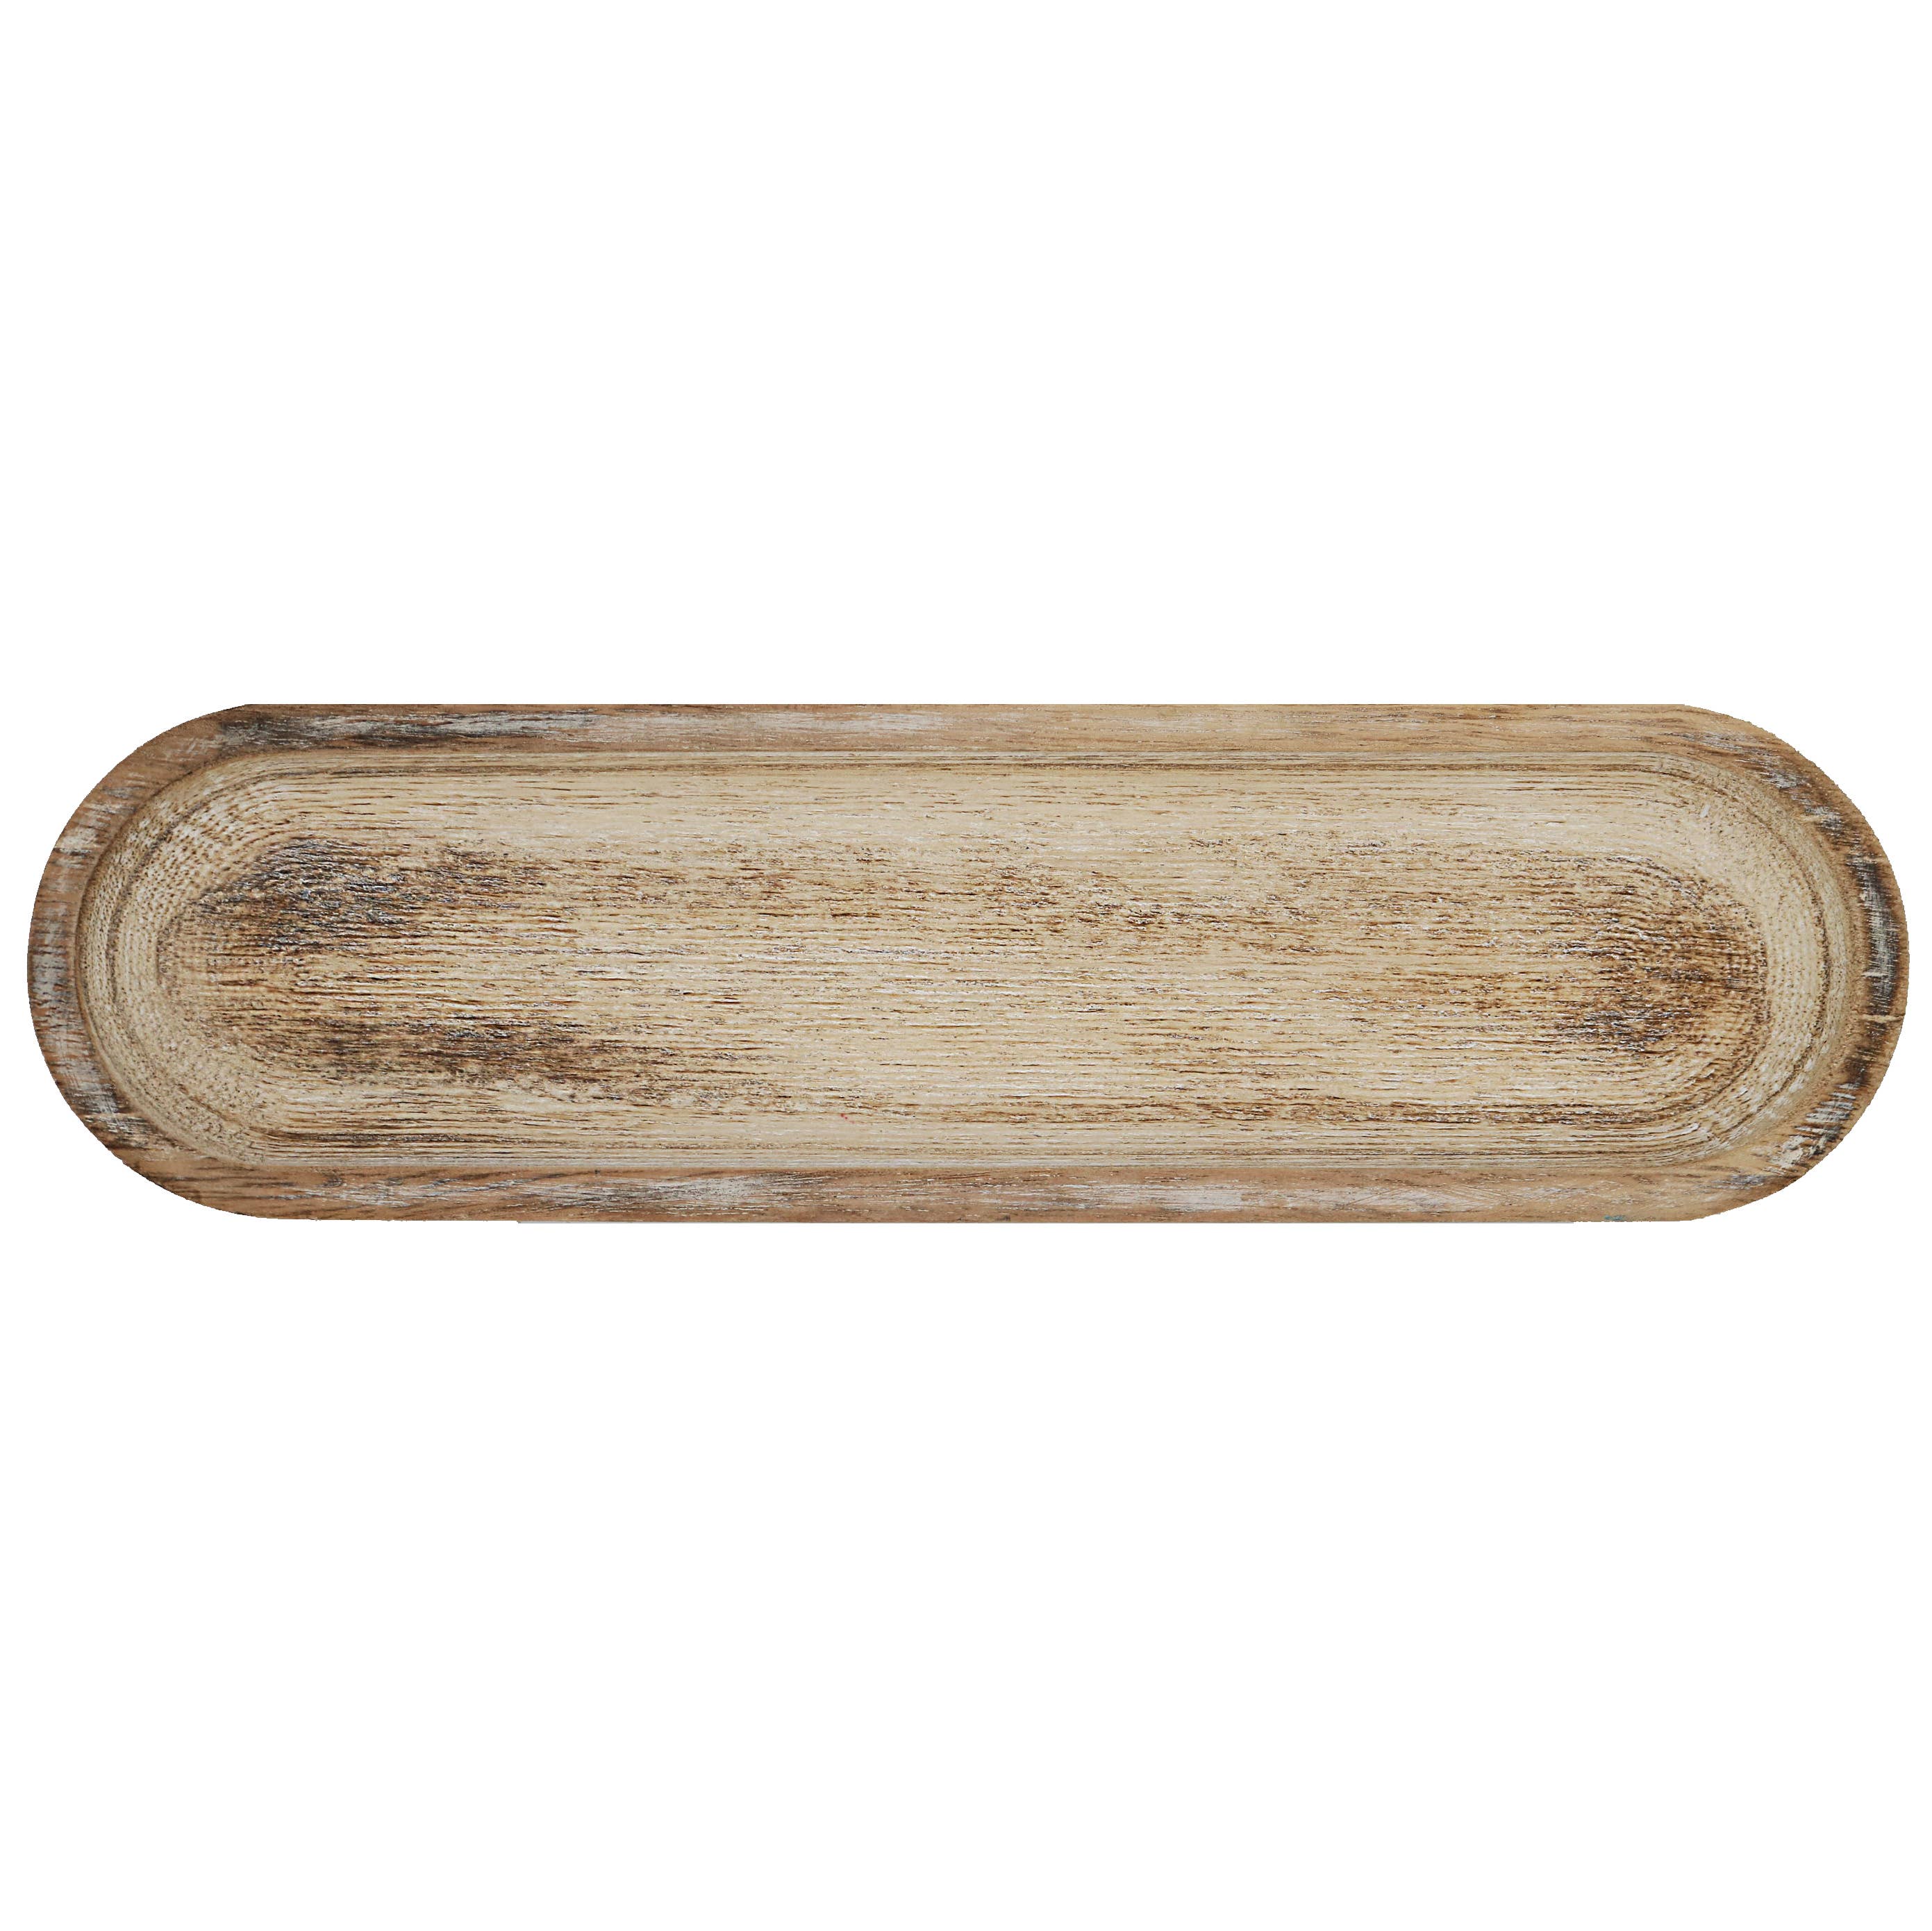 Large Wood Tray - Rustic - 14x4"